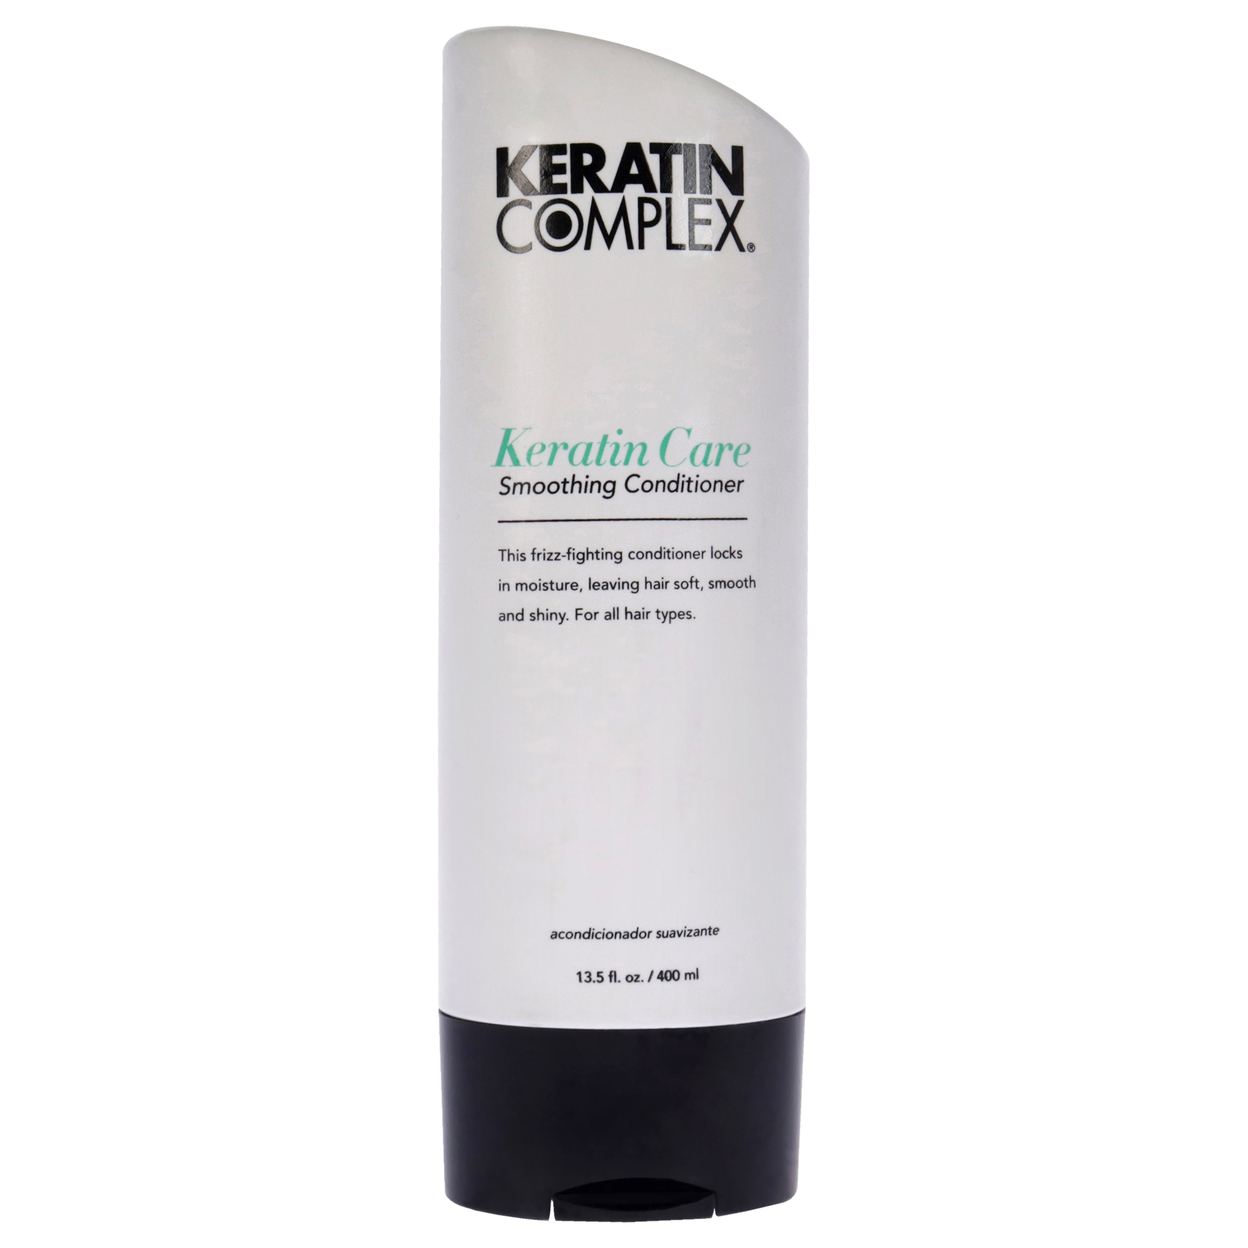 Keratin Complex Unisex HAIRCARE Keratin Care Smoothing Conditioner 13.5 Oz